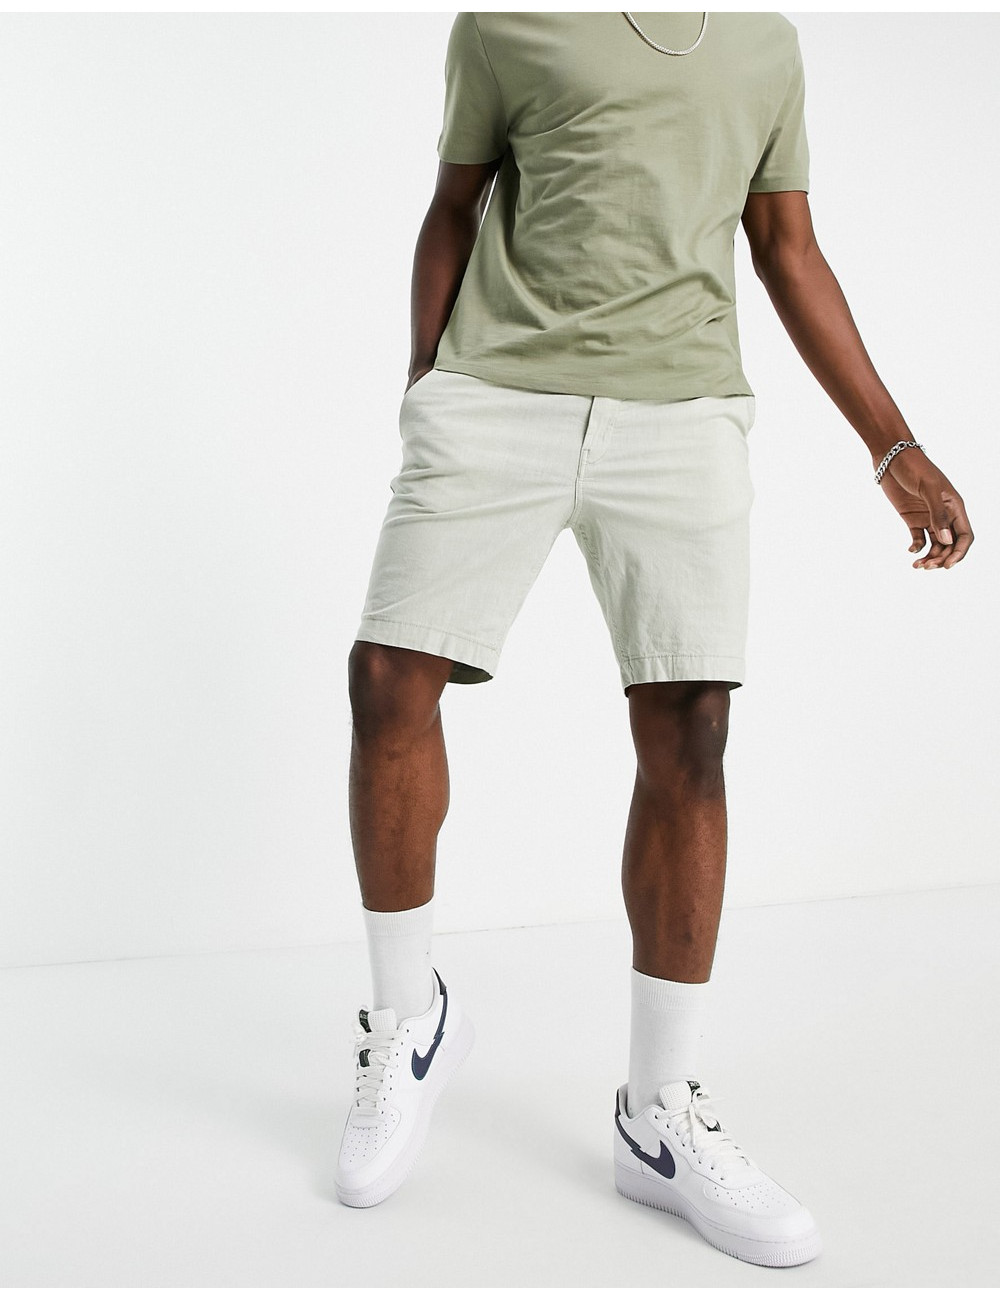 Selected Homme linen shorts...